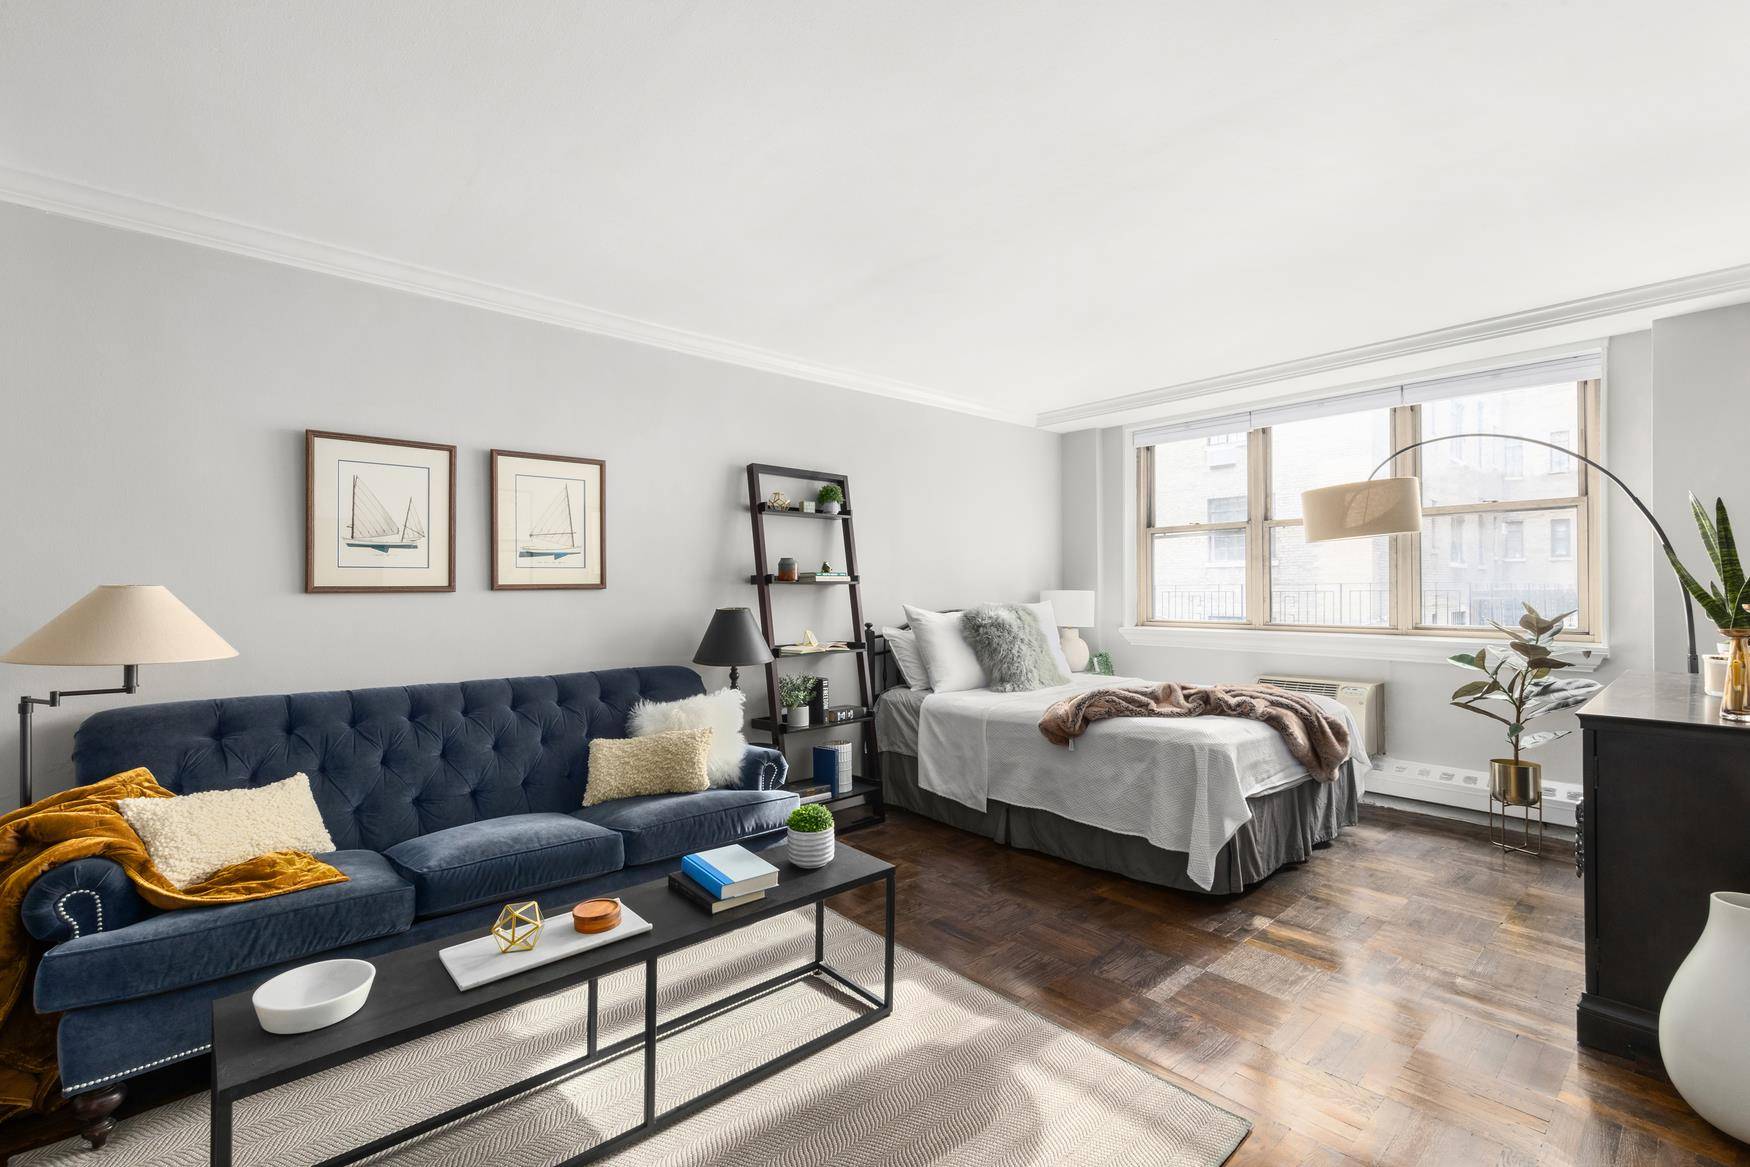 Impeccable renovation with timeless taste in your condo like rules home in Greenwich Village.